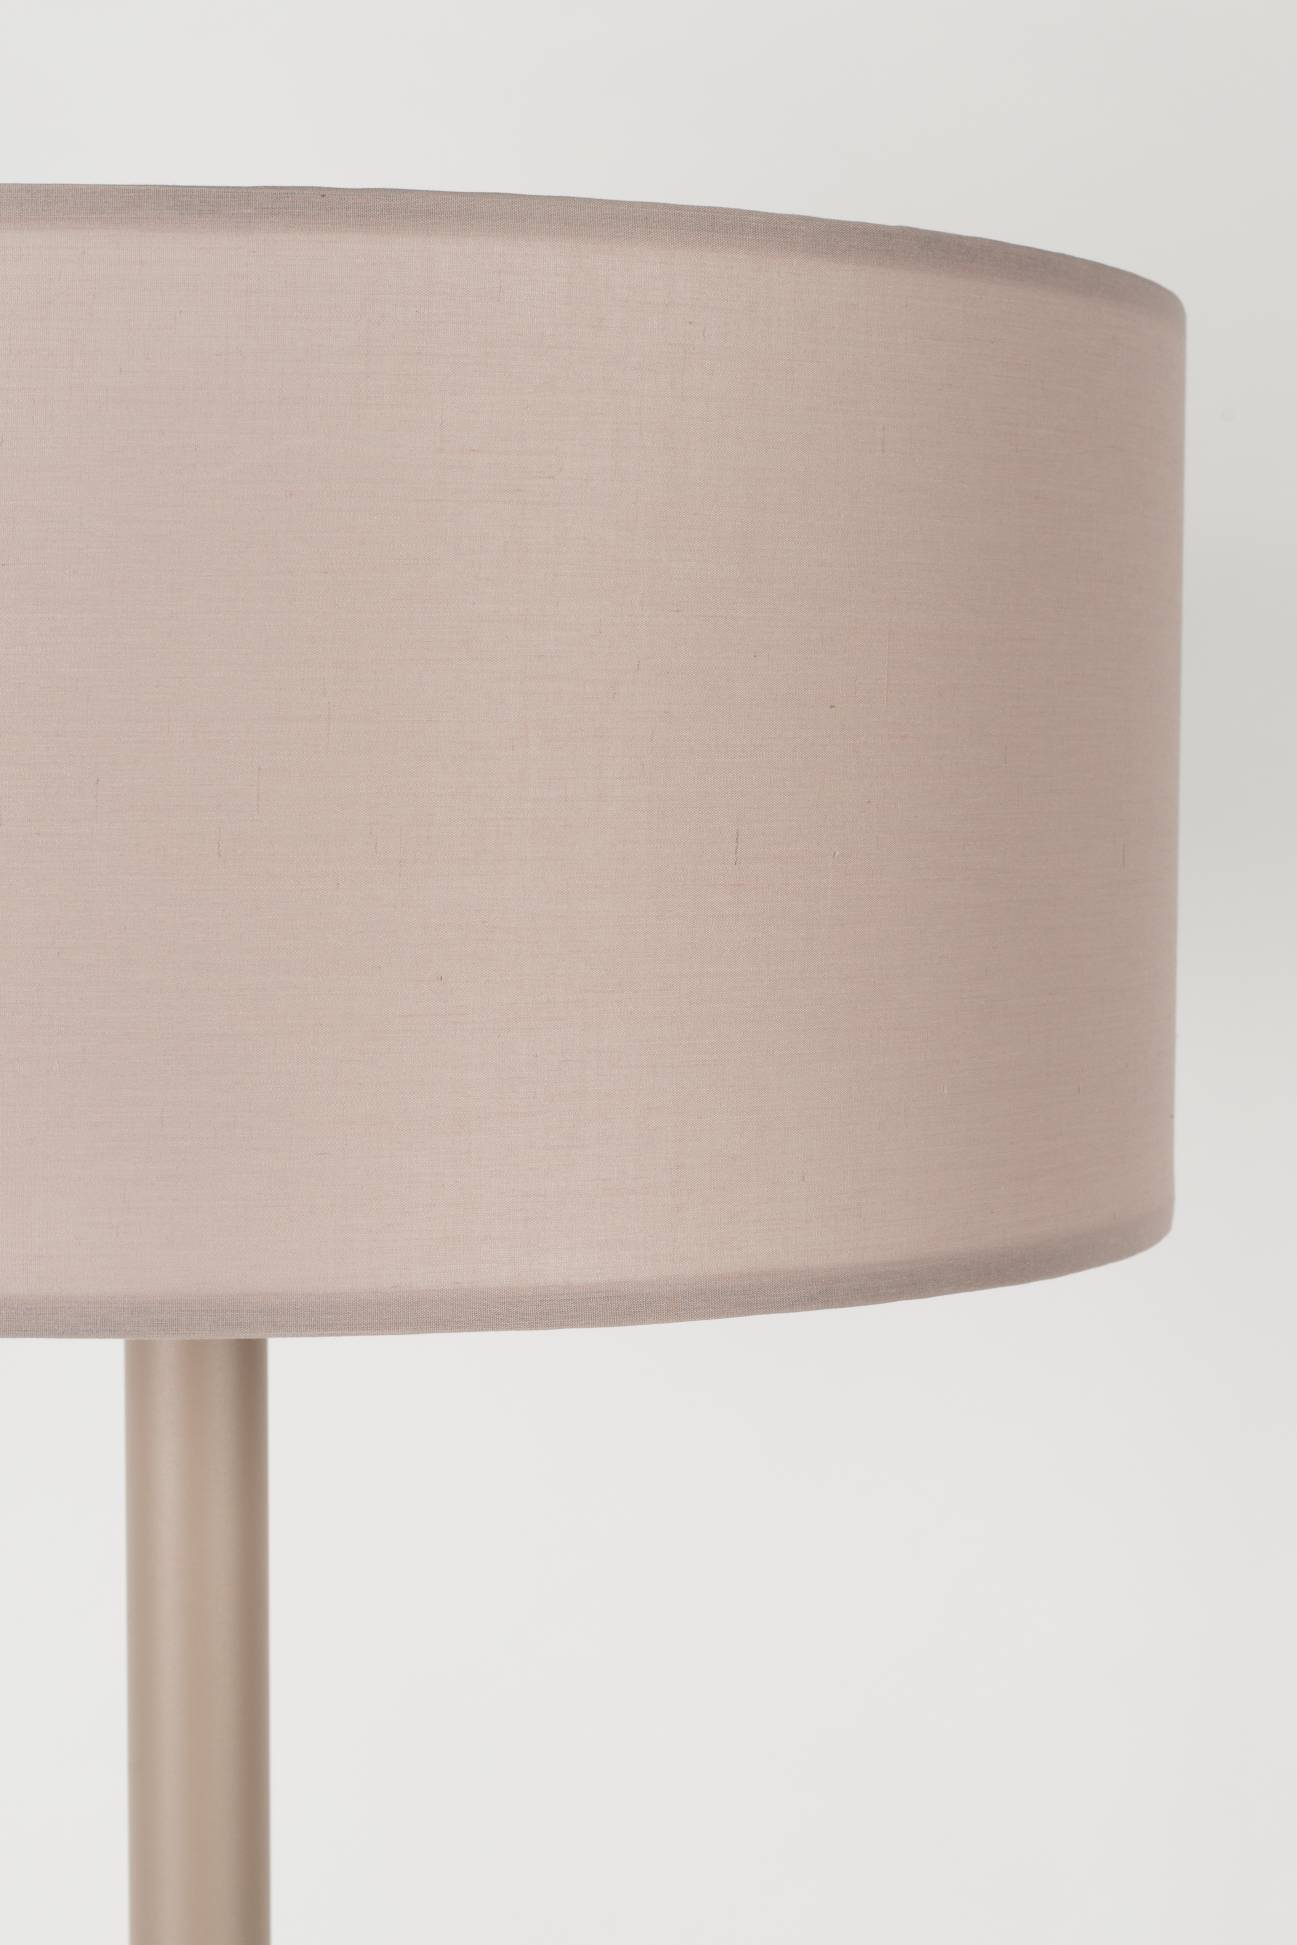 Zuiver | FLOOR LAMP SHELBY TAUPE Default Title